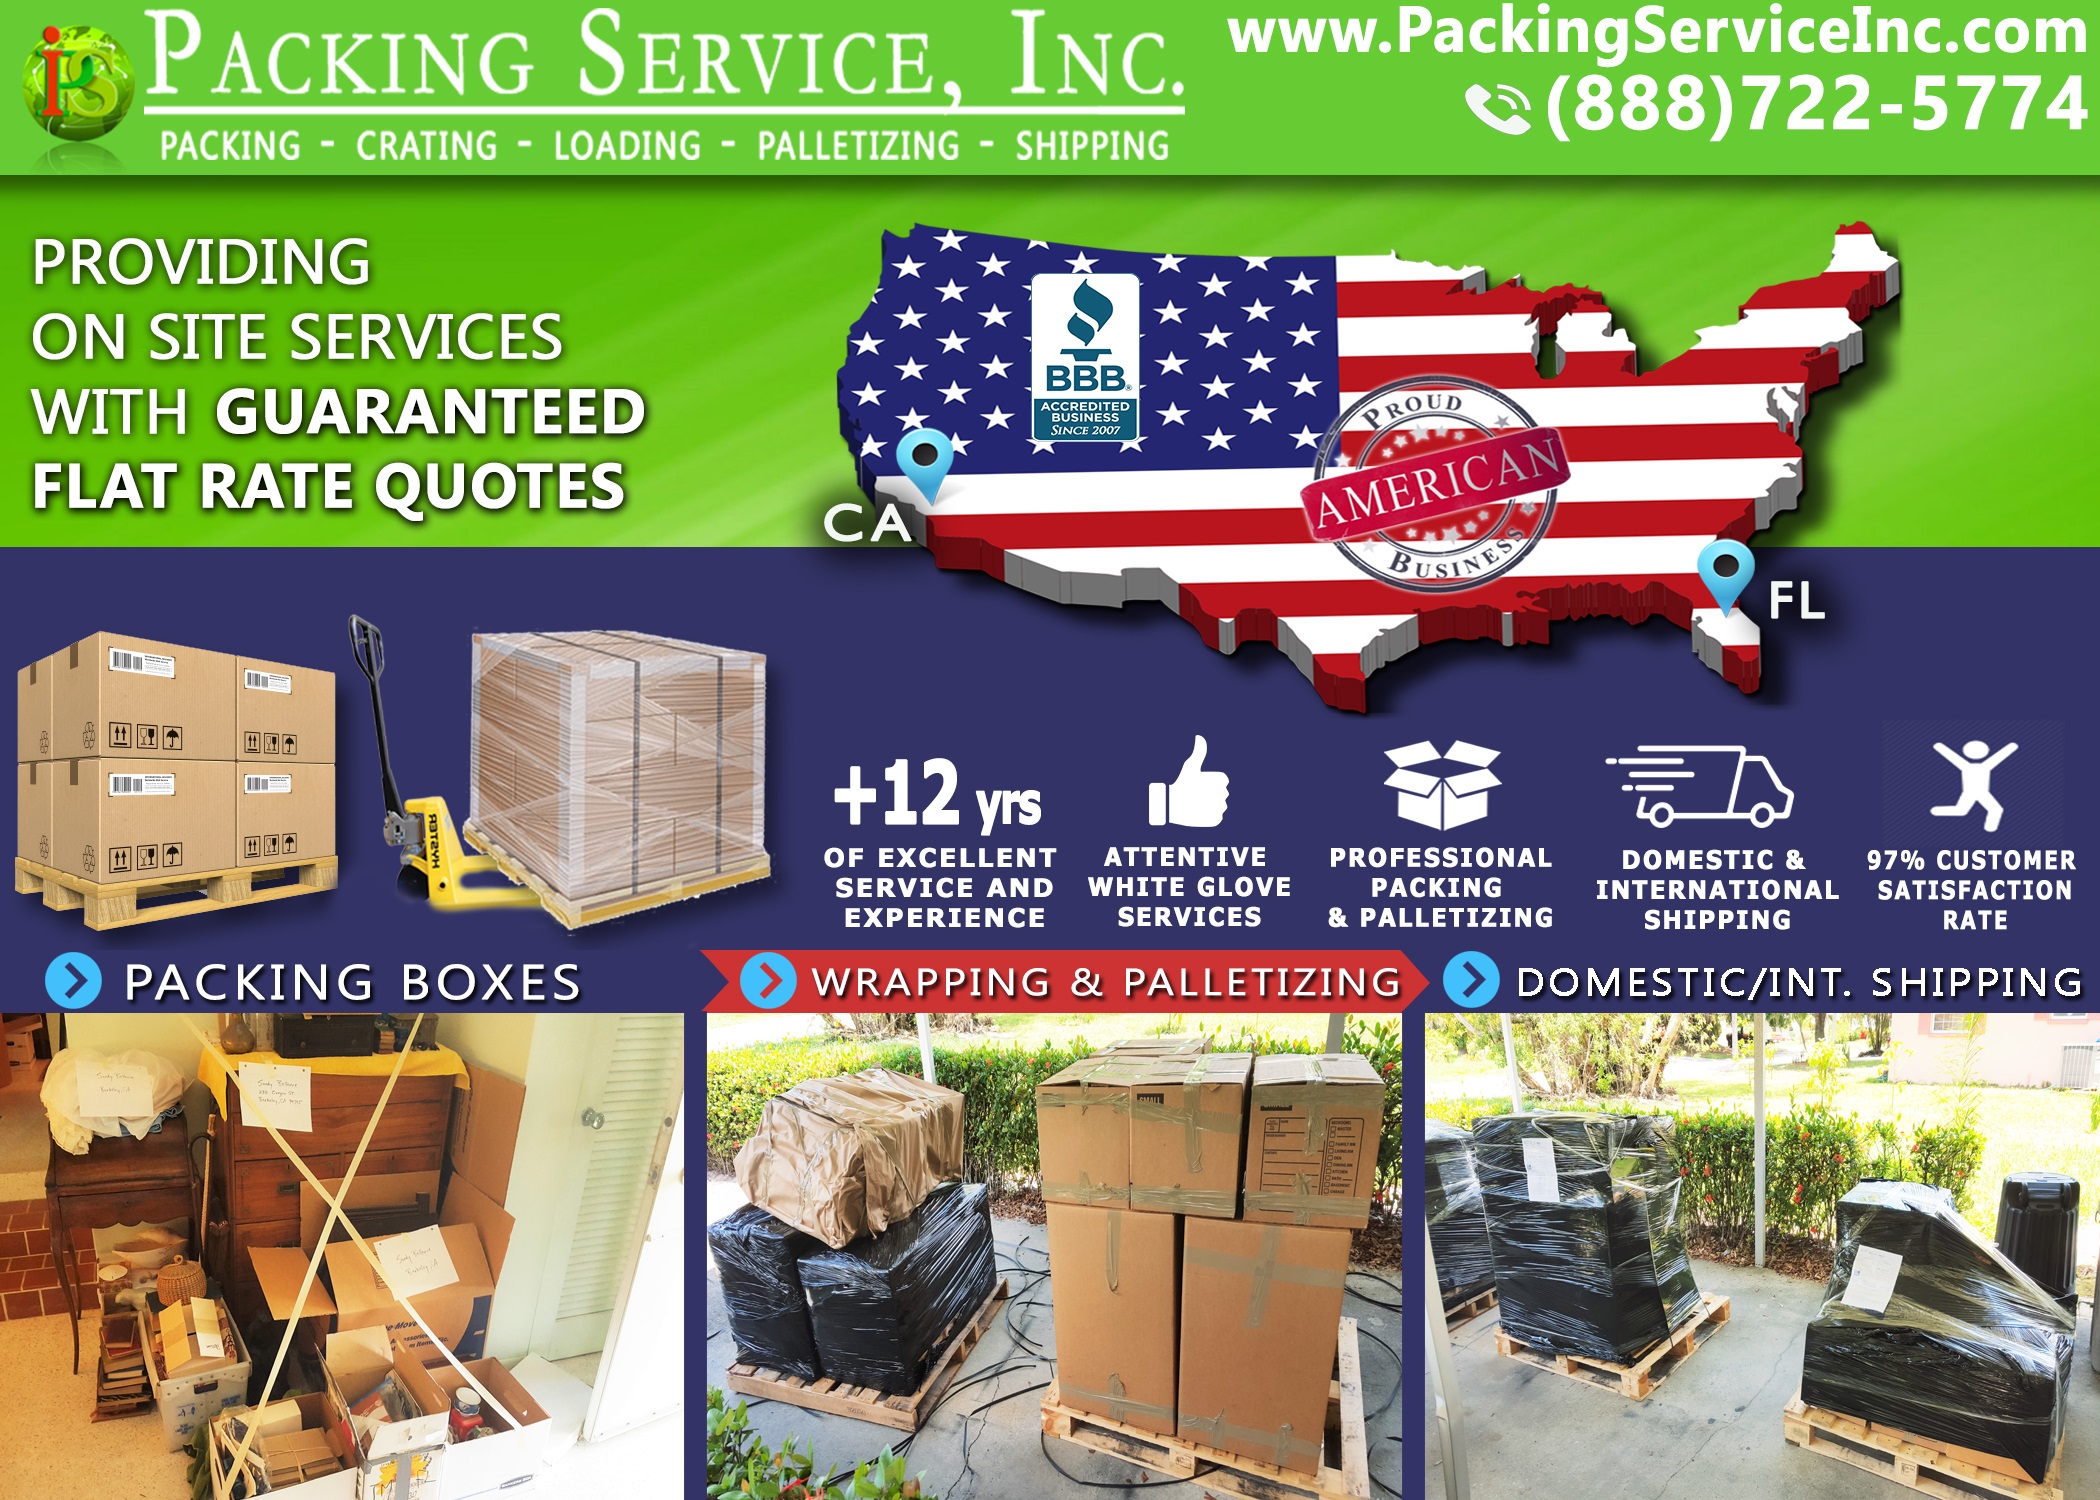 packing-boxes-palletizing-and-shipping-from-florida-to-california-with-packing-service-inc-222